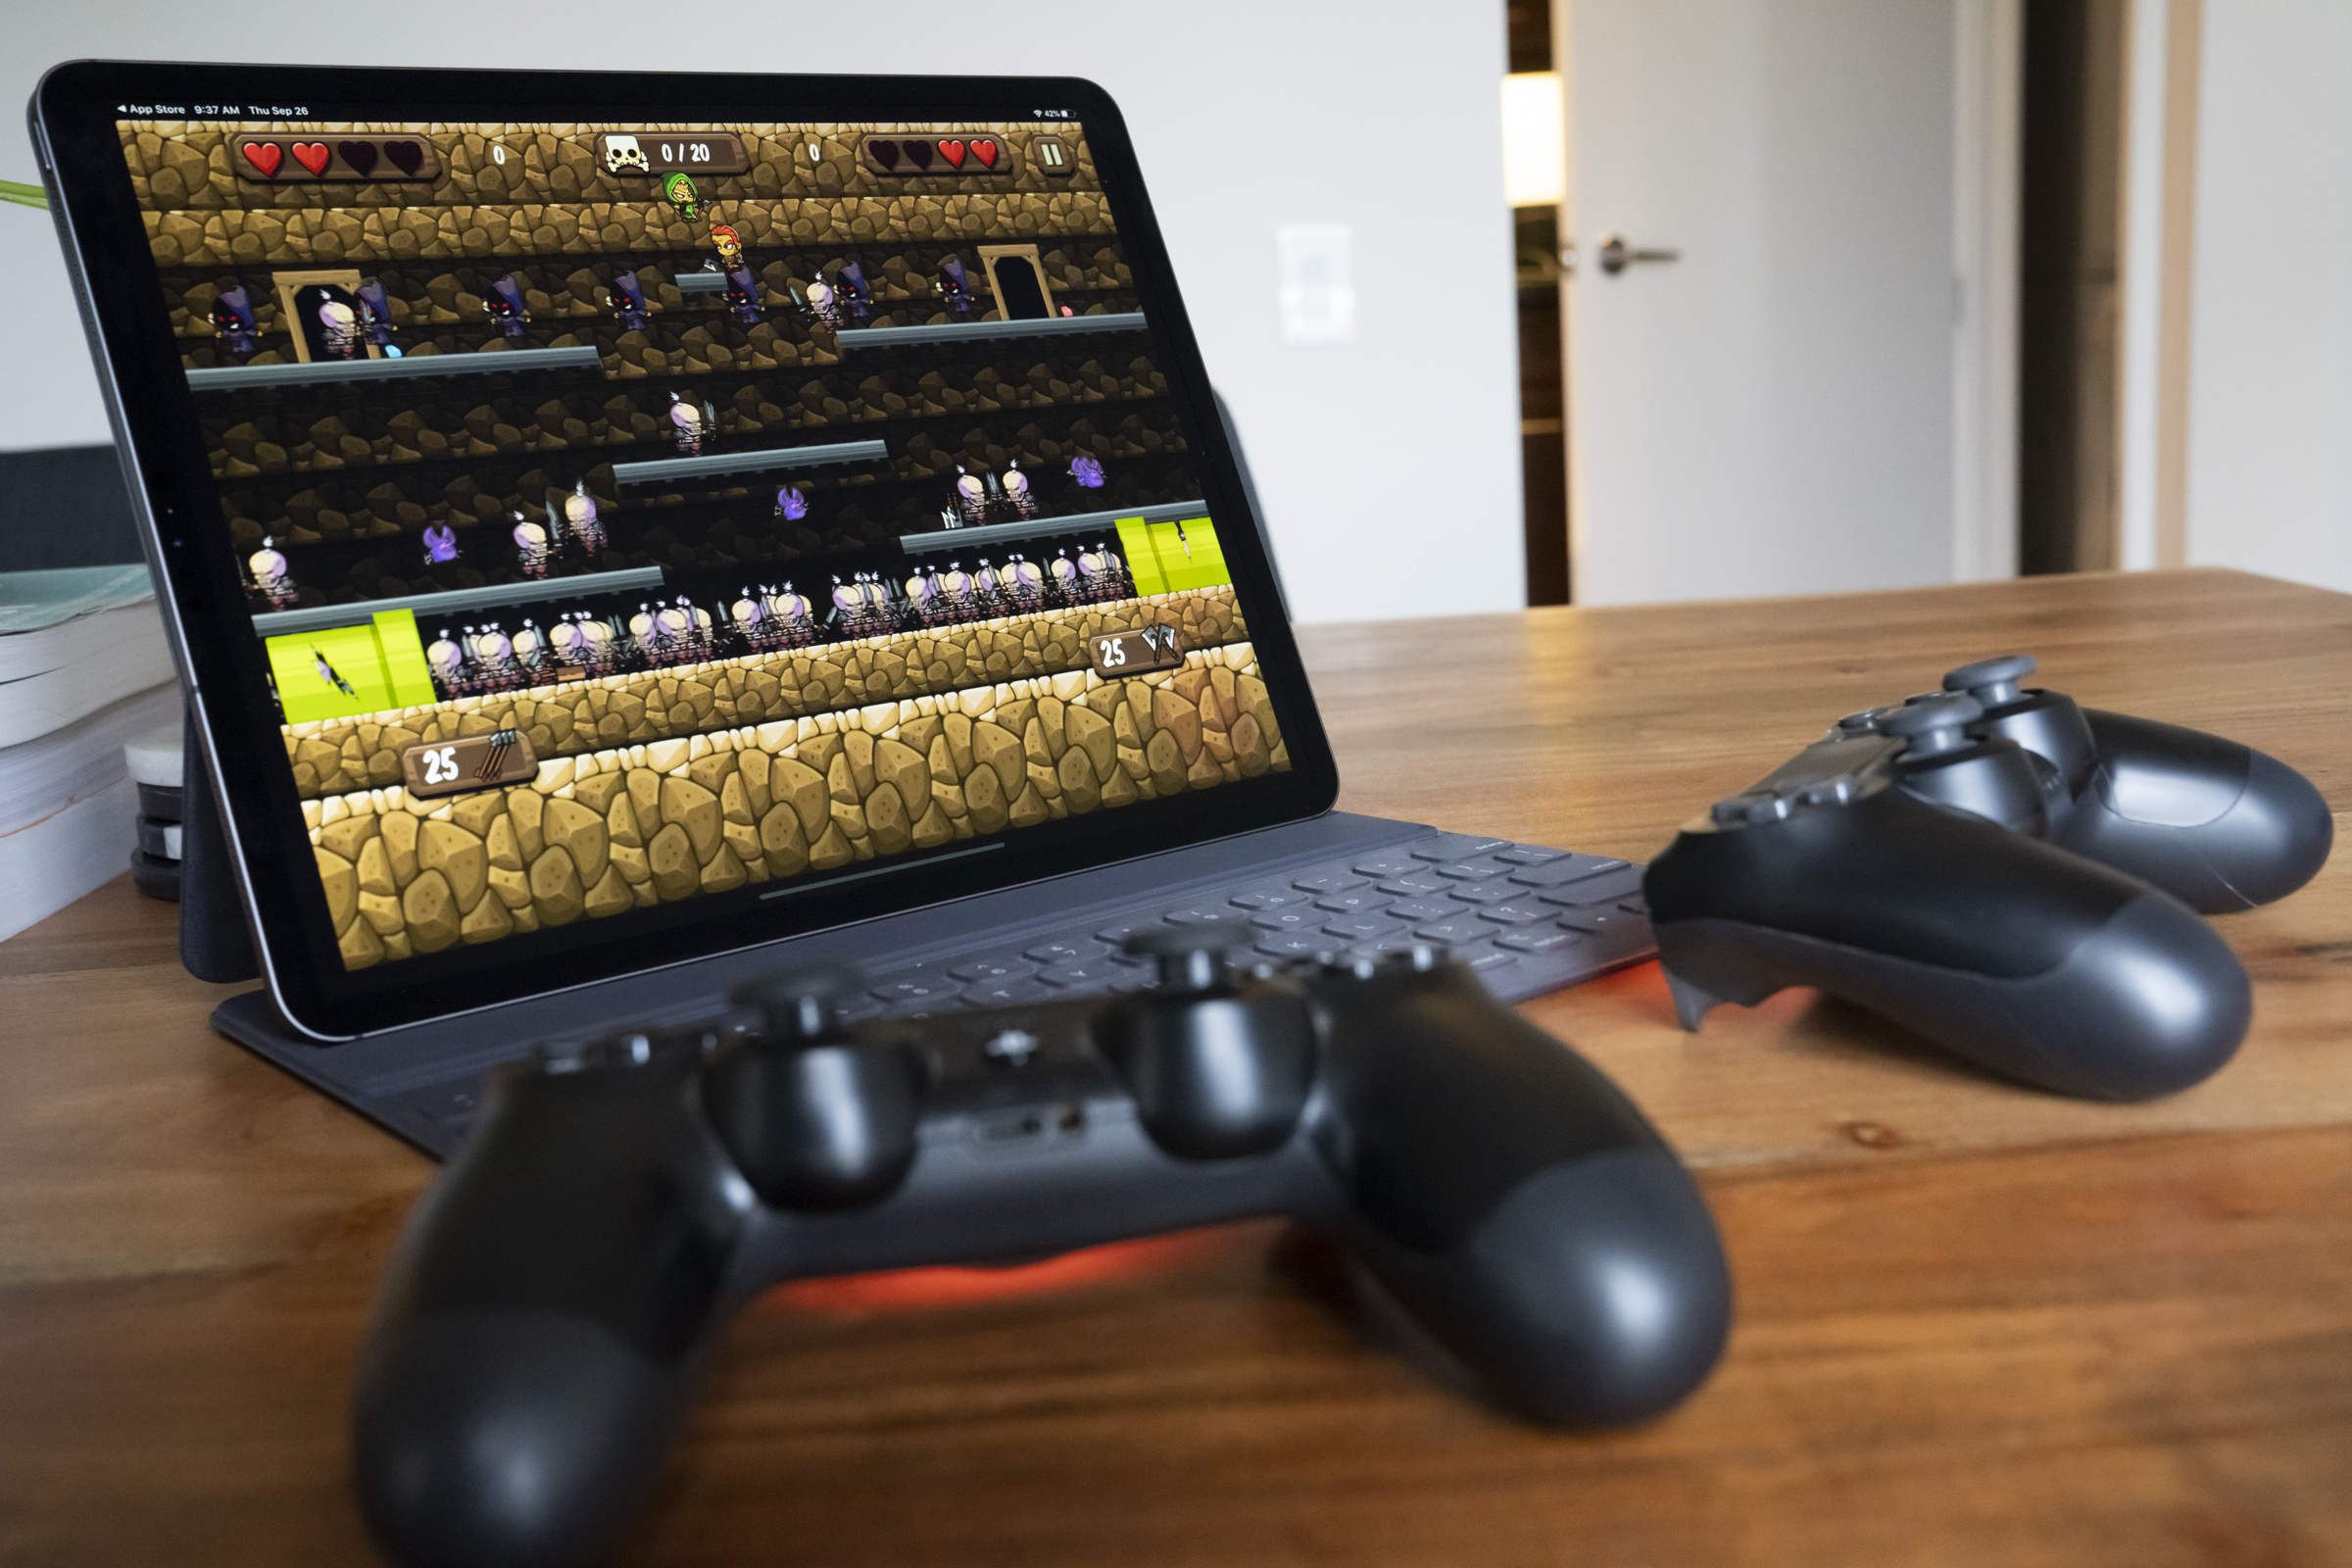 råd fjols adelig Apple's iOS and iPadOS 13 support multiple PS4 or Xbox One controllers,  which could be huge for Arcade | TechCrunch